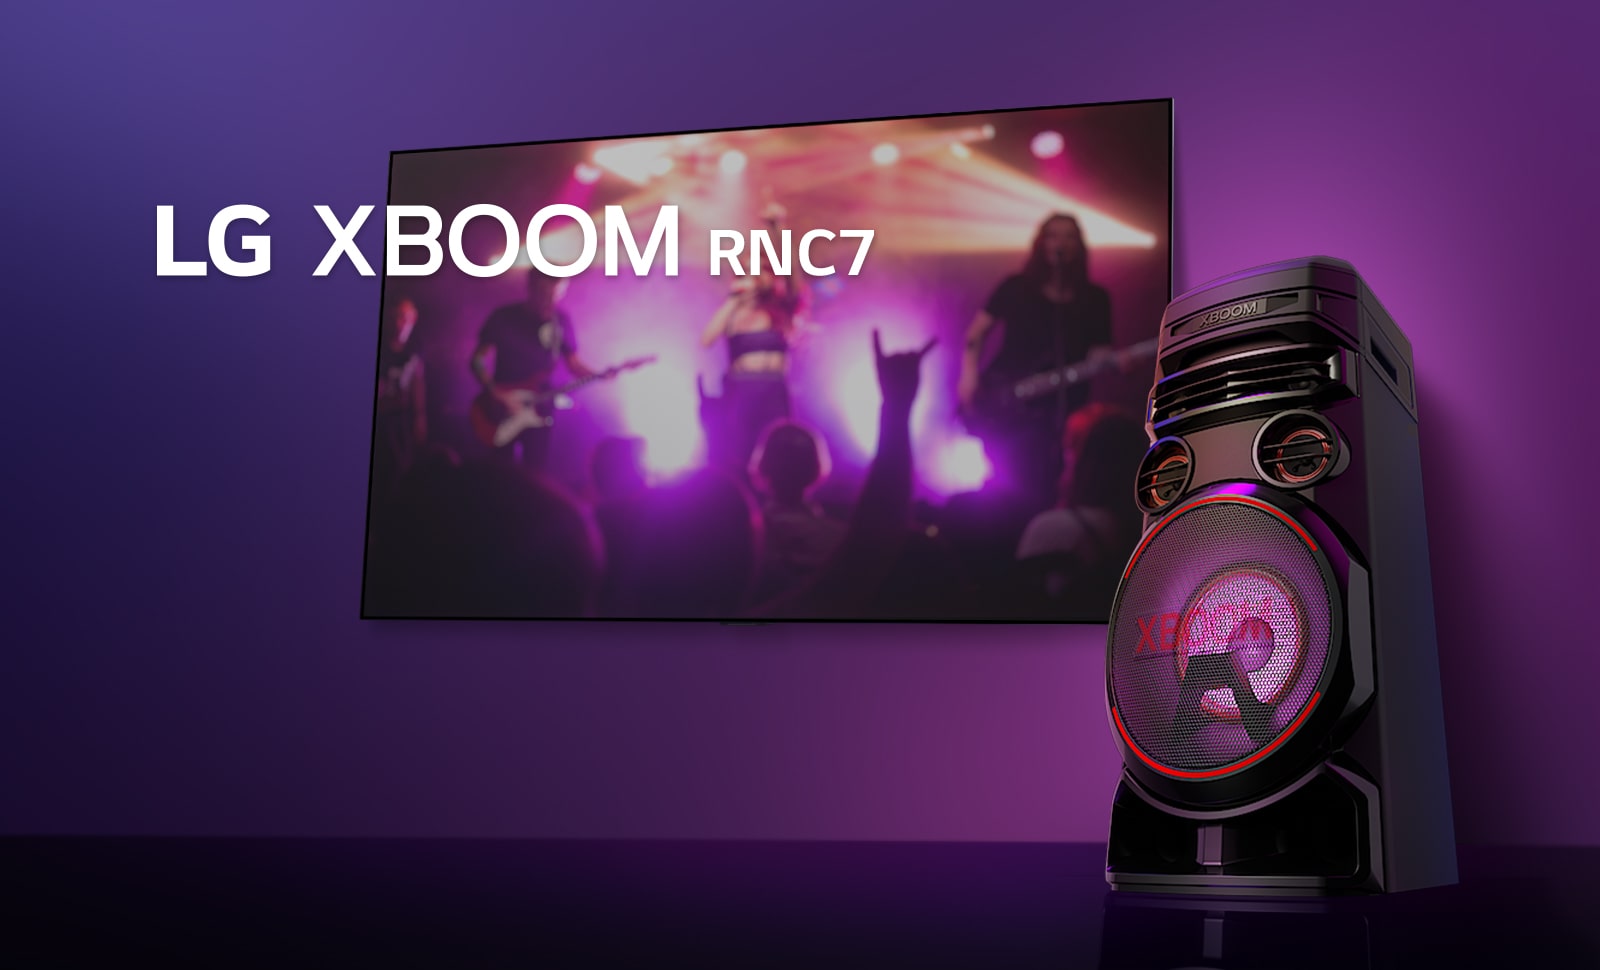 A low angle view of the right side of LG XBOOM rnc7 against a purple background. The XBOOM light are also purple. And a TV screen displays a concert scene.